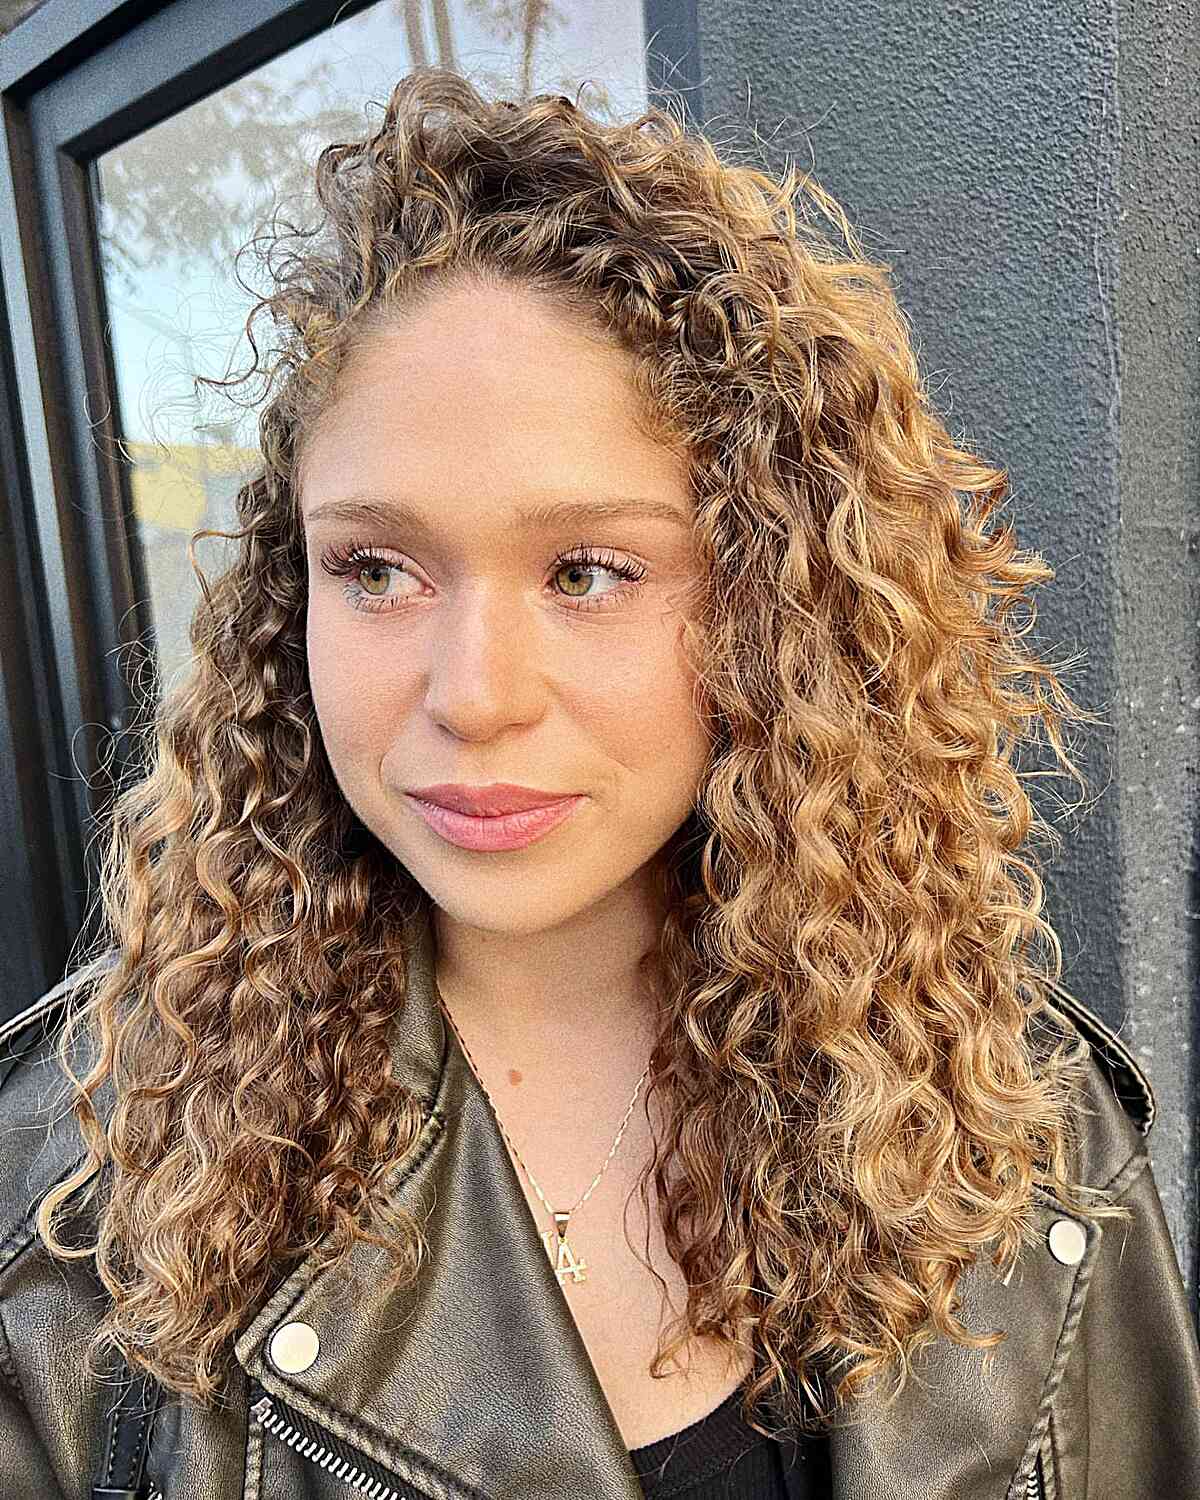 Diffused Golden Curls Simple Hairstyle for ladies in their 30s